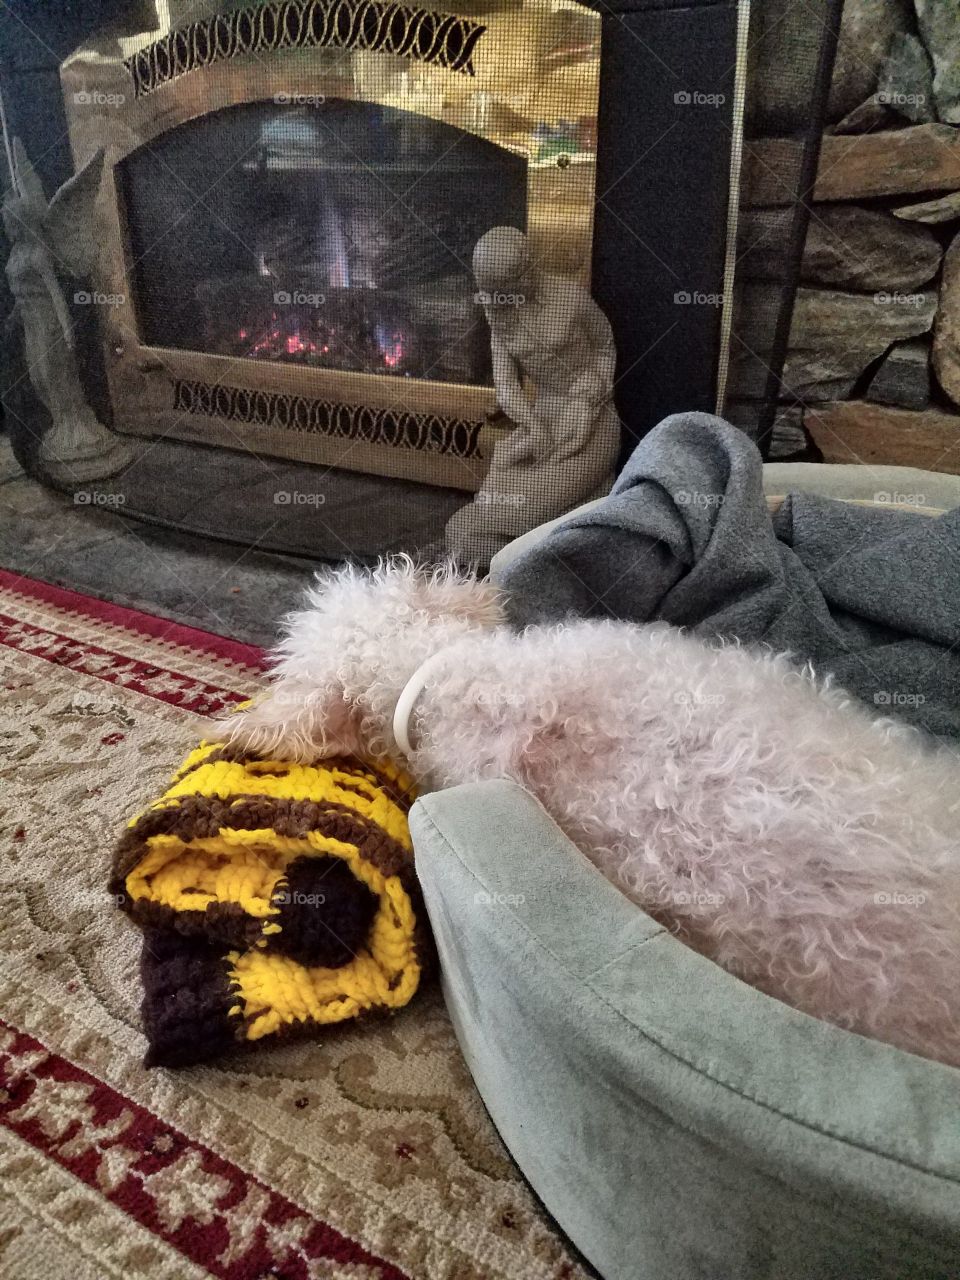 Fireplace with poodle sleeping in bed, head on pillow in front of the flames.